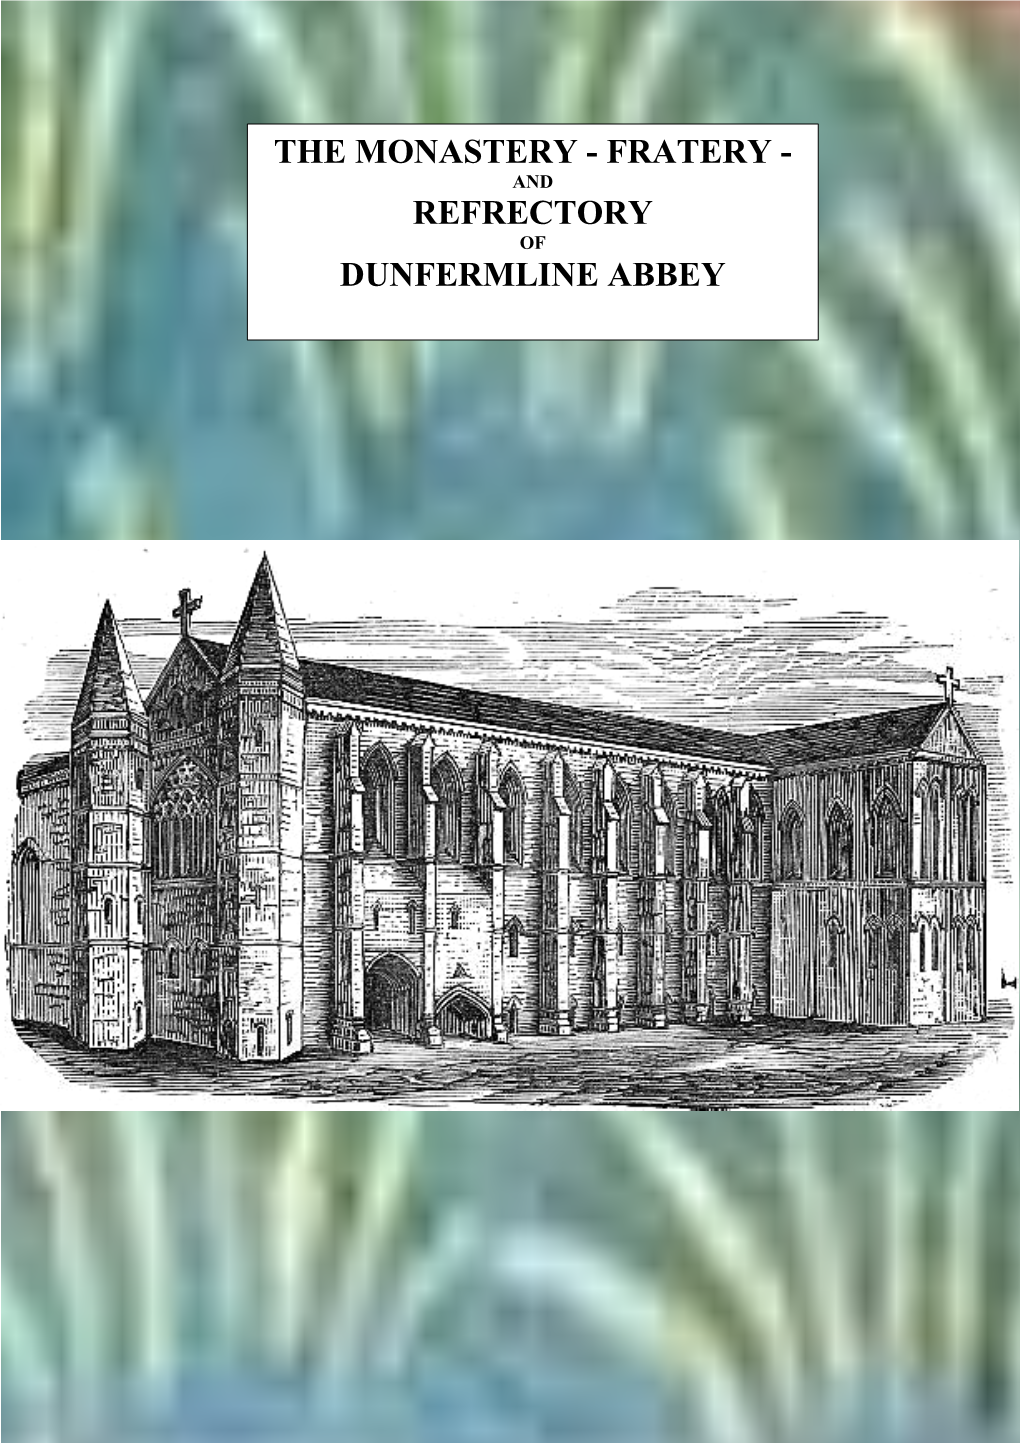 The Monastery - Fratery - and Refrectory of Dunfermline Abbey